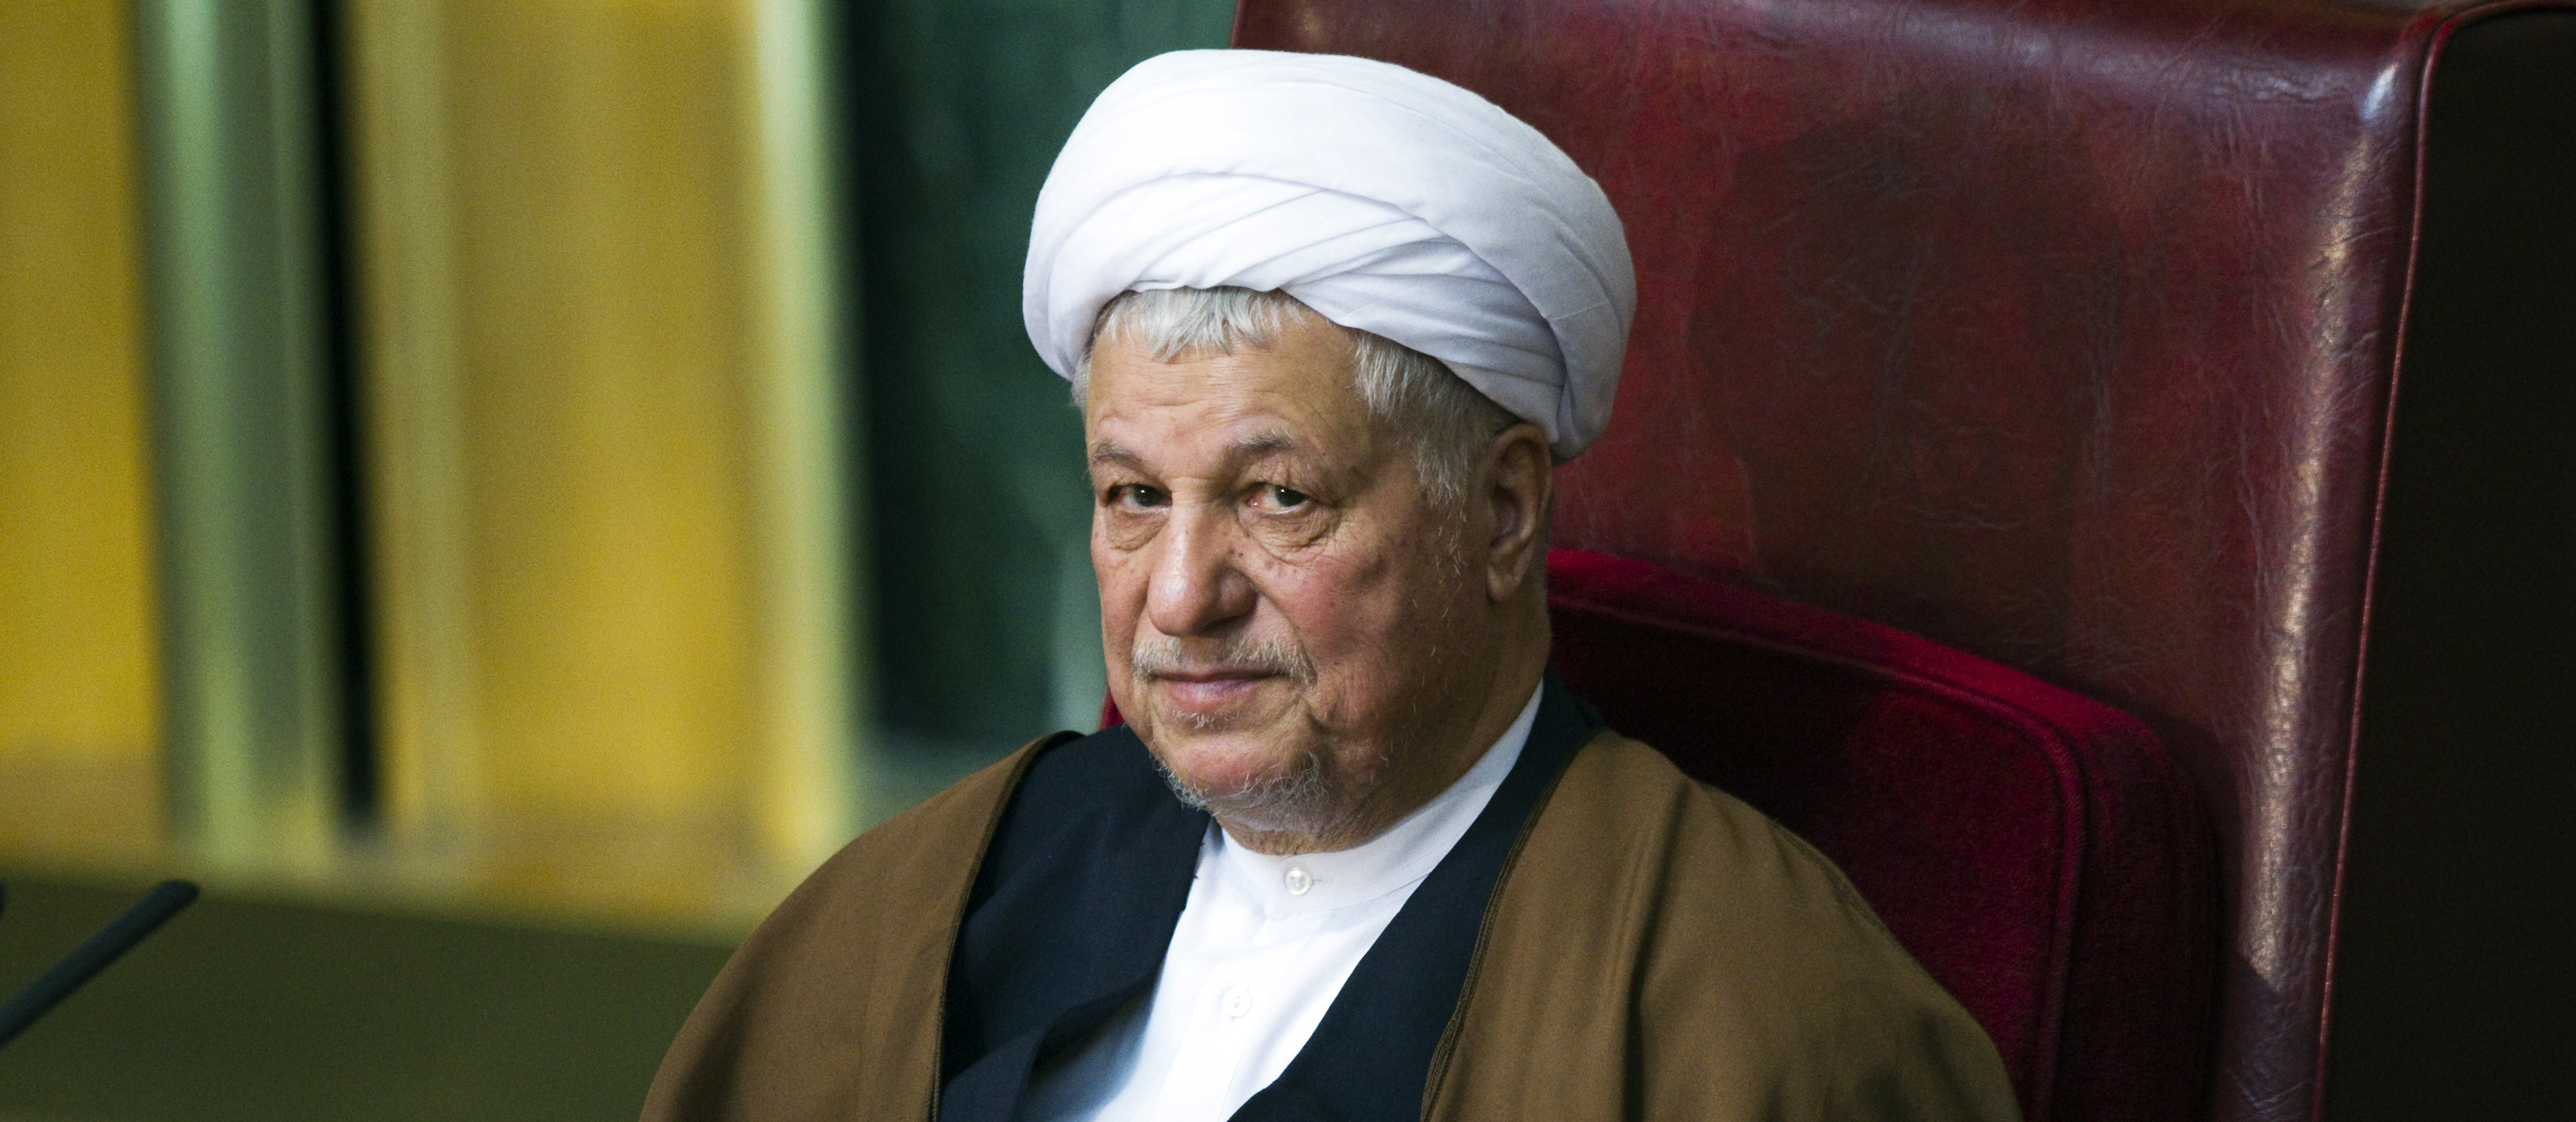 Former Iranian president Akbar Hashemi Rafsanjani attends Iran's Assembly of Experts' biannual meeting in Tehran March 8, 2011. Rafsanjani lost his position on Tuesday as head of an important state clerical body after hardliners criticised him for being too close to the reformist opposition. REUTERS/Raheb Homavandi (IRAN - Tags: POLITICS)